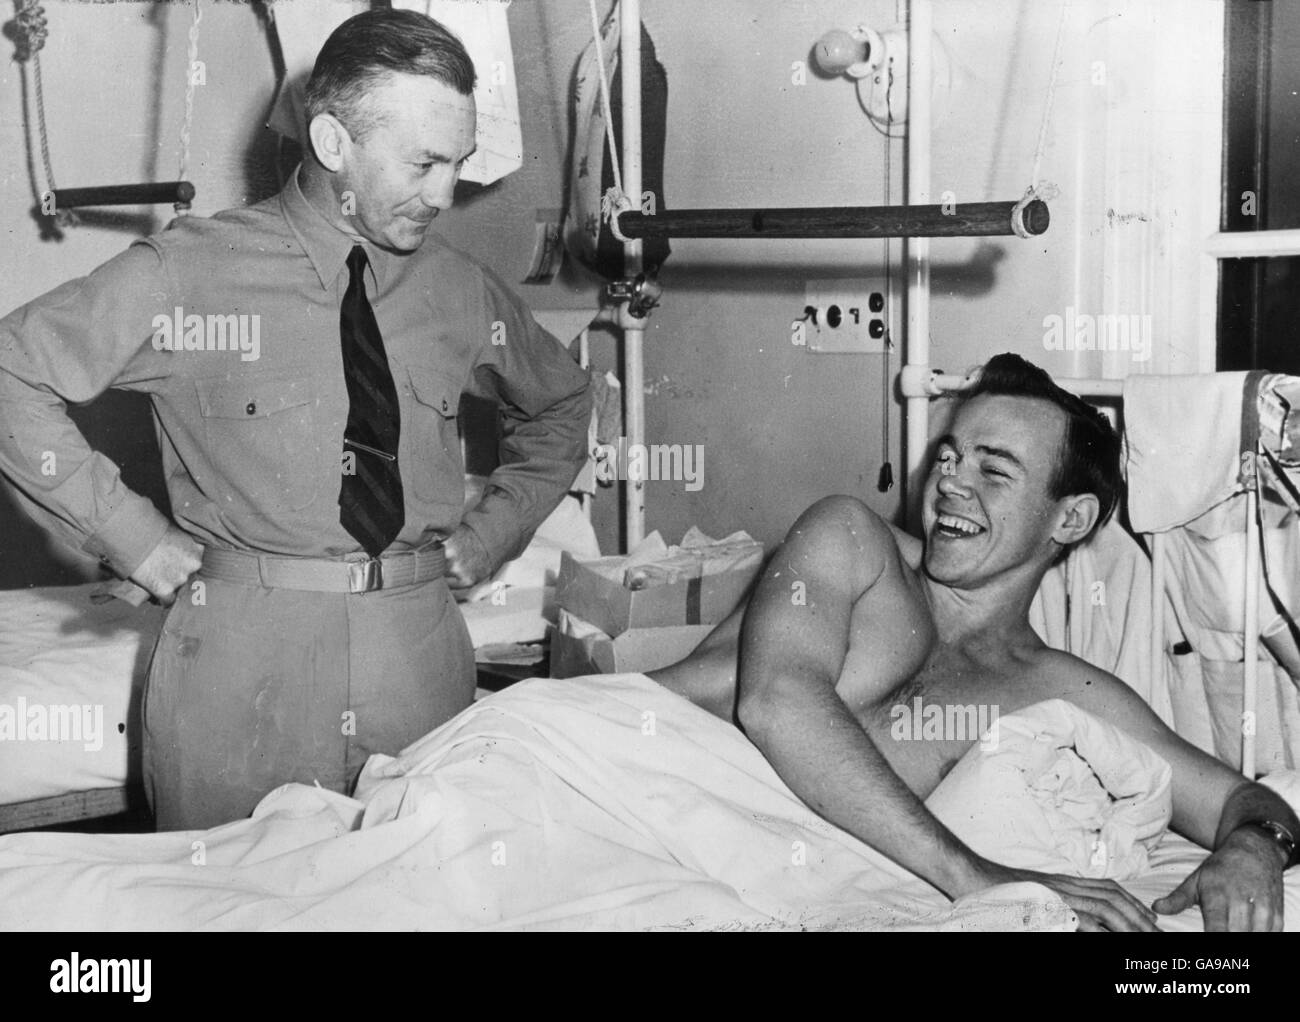 U.S. Secretary of the Navy James V. Forrestal's remarks amuse a wounded U.S. Marine in a hospital after the Battle of Iwo Jima. Stock Photo